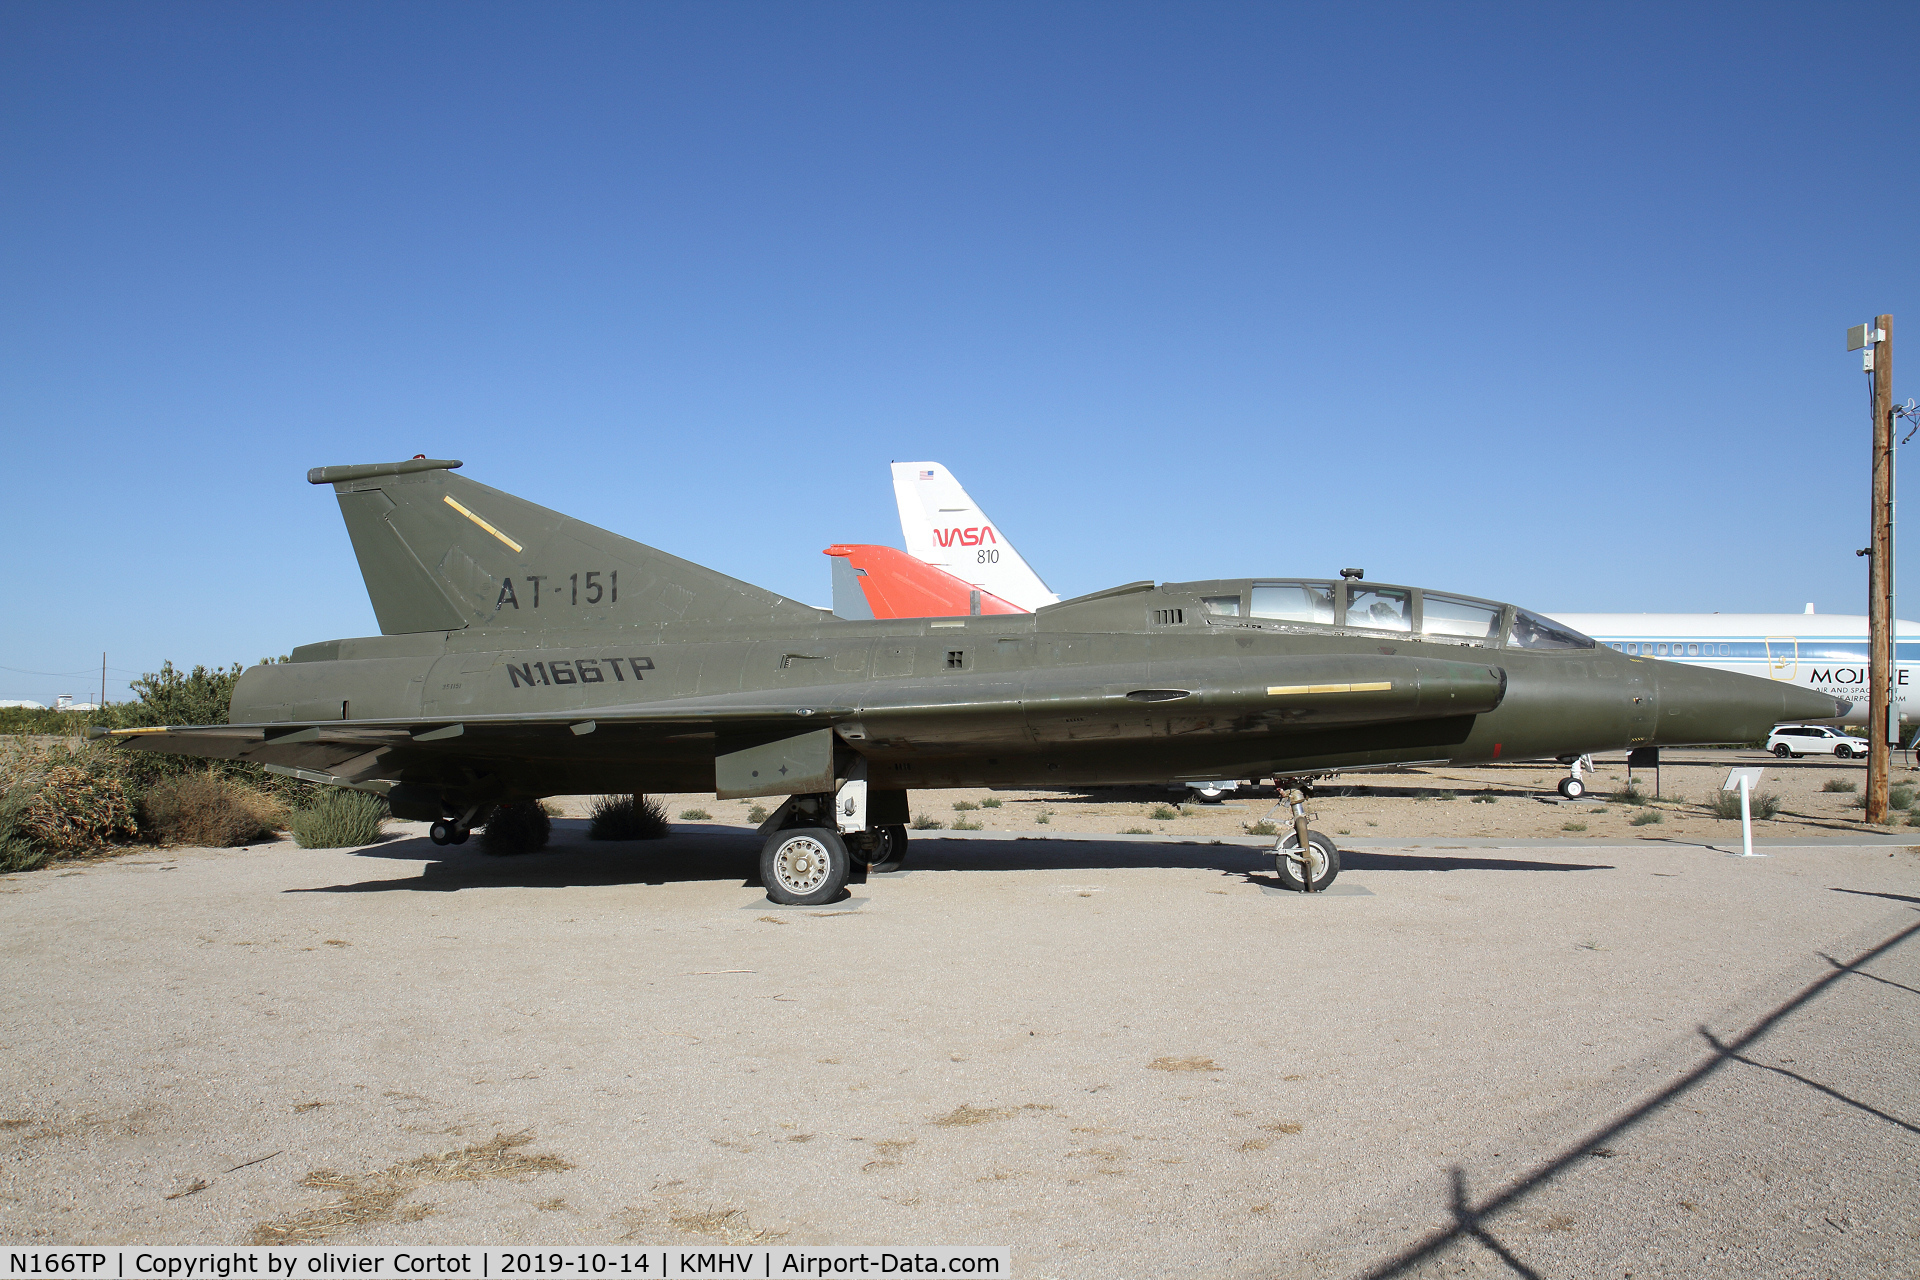 N166TP, 1971 Saab TF-35 Draken C/N 35-1151, now at the airport entrance